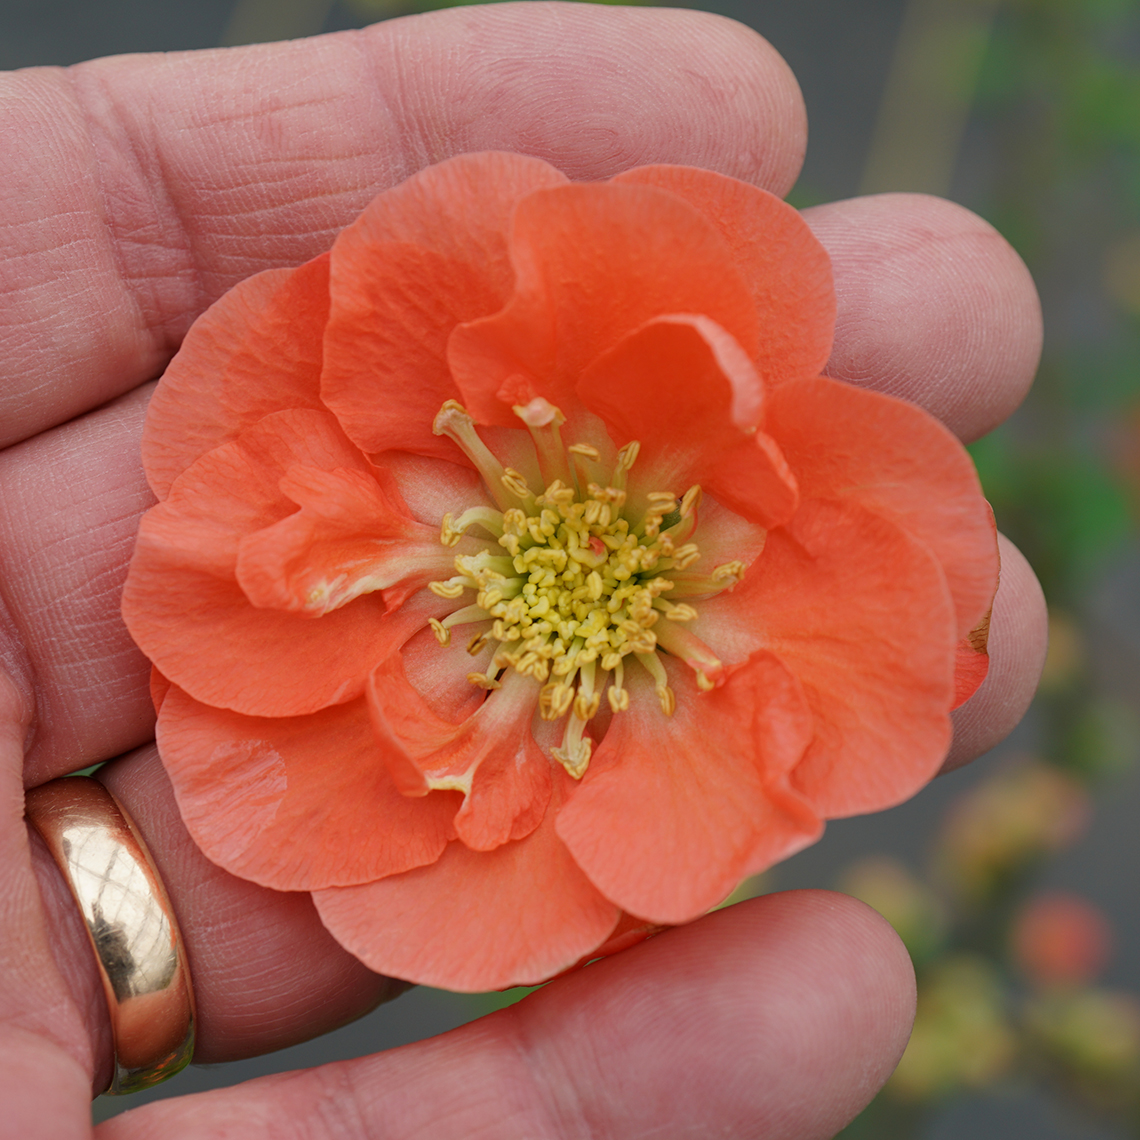 Single Double Take Peach Chaenomeles bloom in man's hand for size comparison